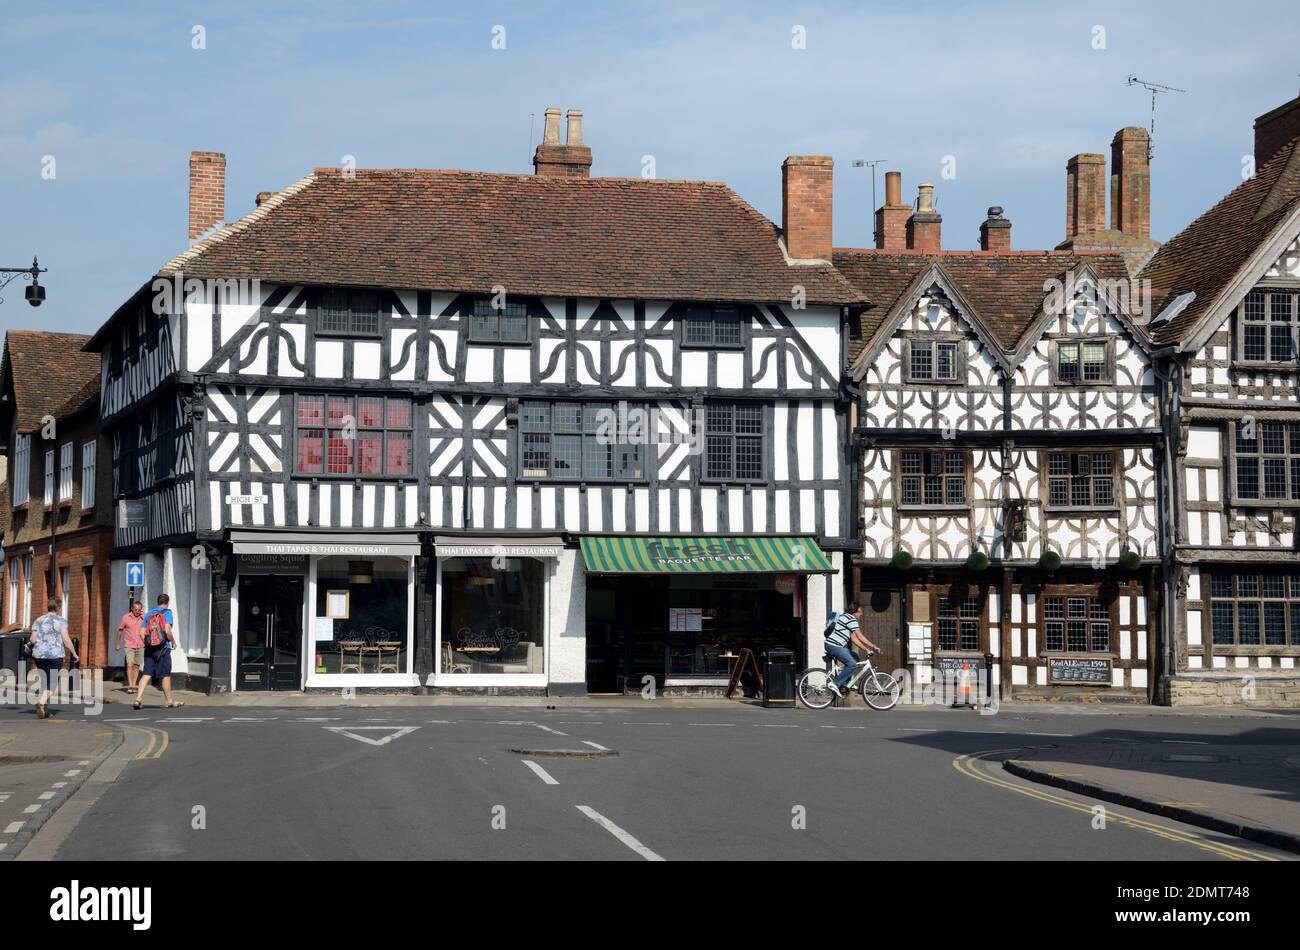 Tourists & Traditional Architecture, Medieval Half-timber Buildings includiing the Garrick Hotel Stratford-upon-Avon England Stock Photo